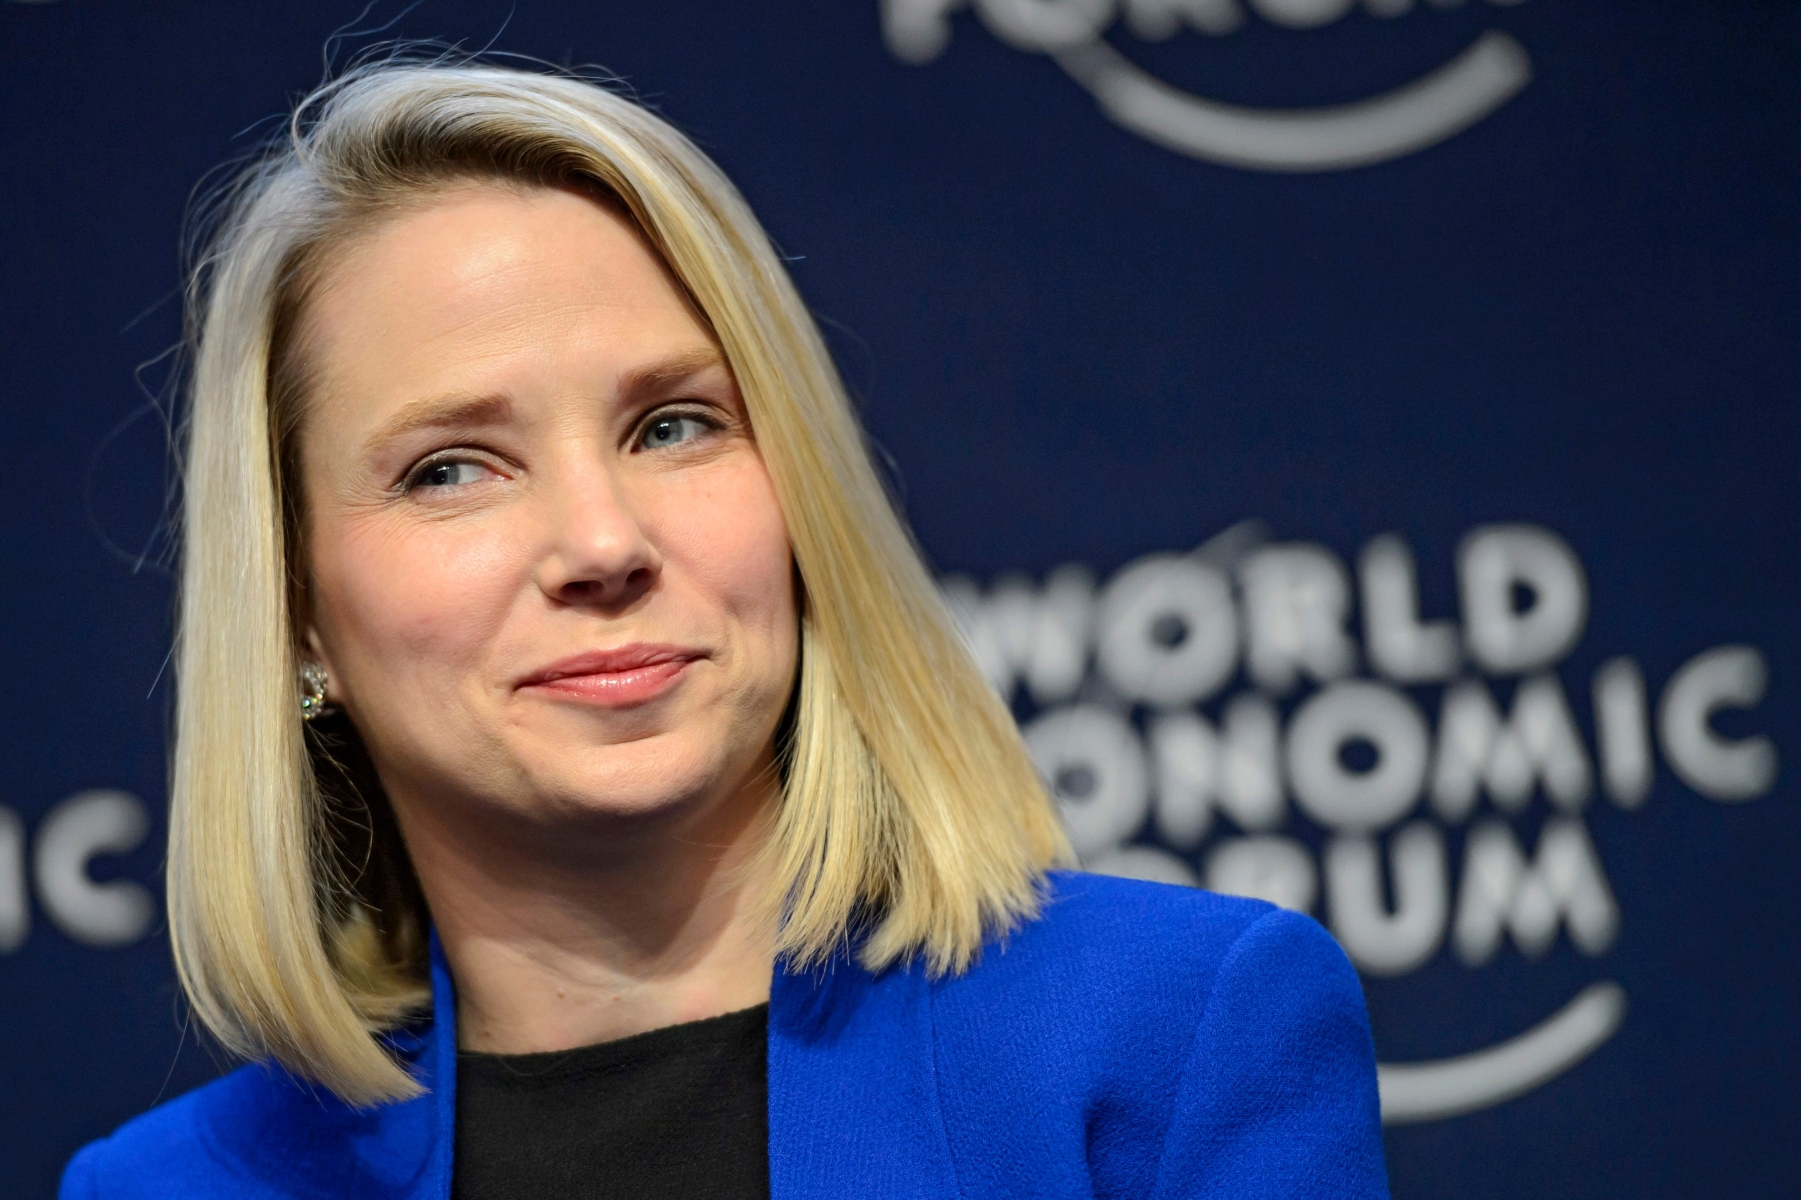 epa05440184 (FILE) A file picture dated 22 January 2014 shows Yahoo CEO Marissa Mayer during a panel session on the first day of the 44th Annual Meeting of the World Economic Forum (WEF) in Davos, Switzerland. US telecommunications giant Verzion on 25 July 2016 announced the takeover of Internet dinosaur Yahoo 4.8 billion US dollars.  EPA/LAURENT GILLIERON *** Local Caption *** 52178070 FILE SWITZERLAND USA YAHOO VERIZON